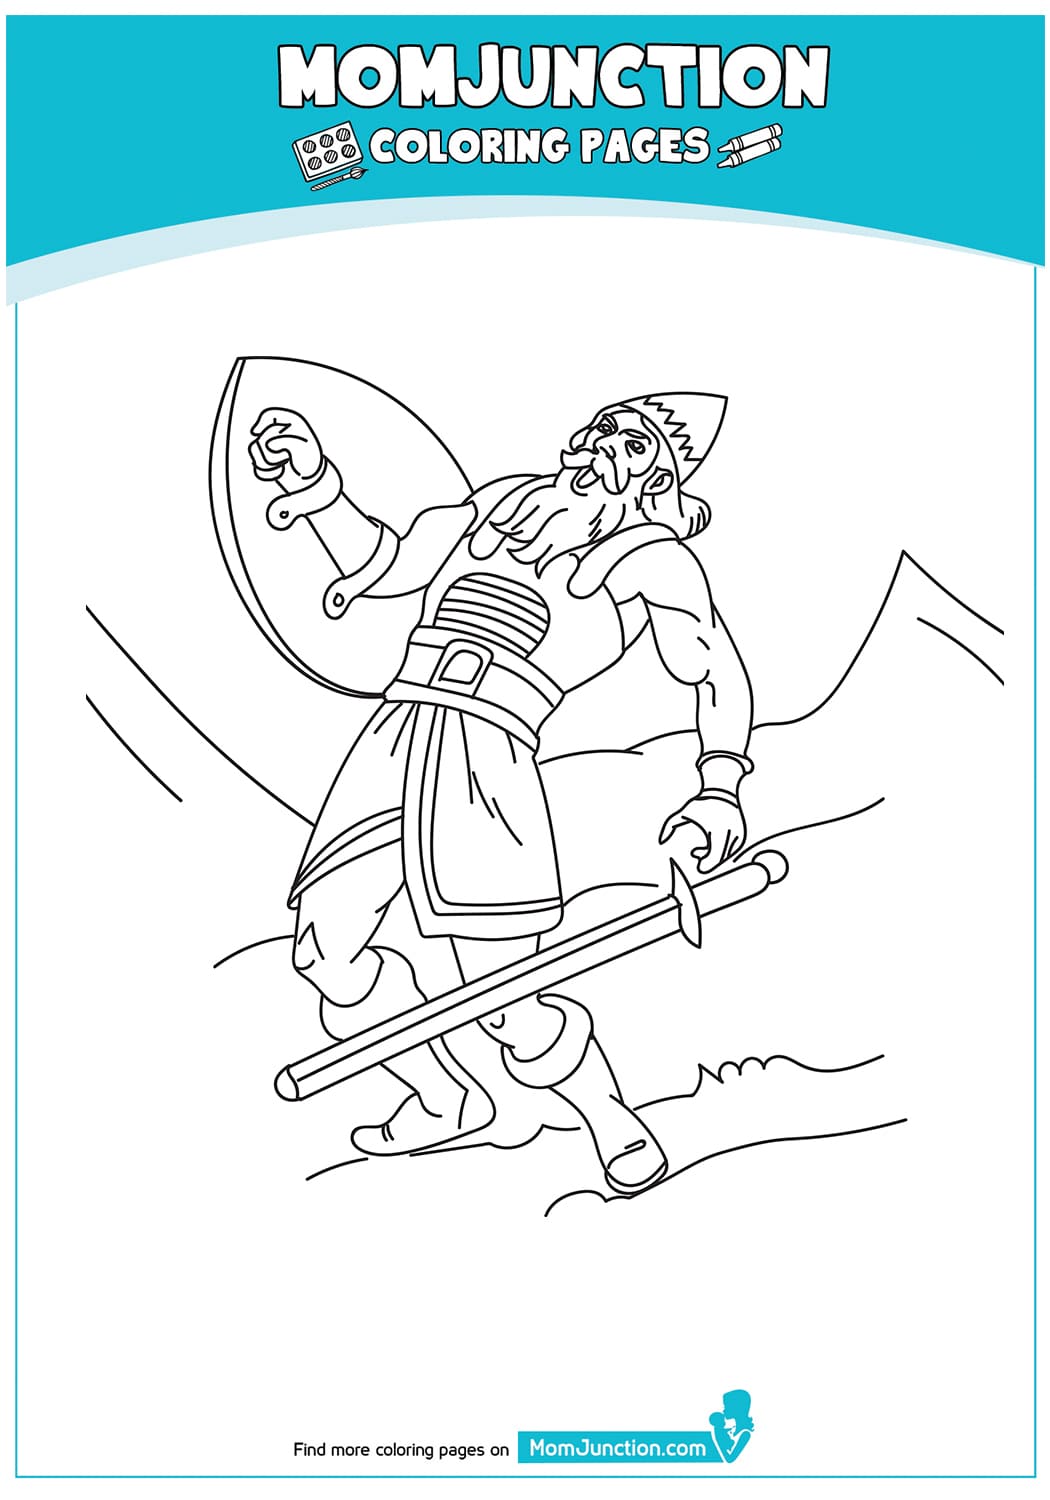 The Goliath Falling Down Coloring Page